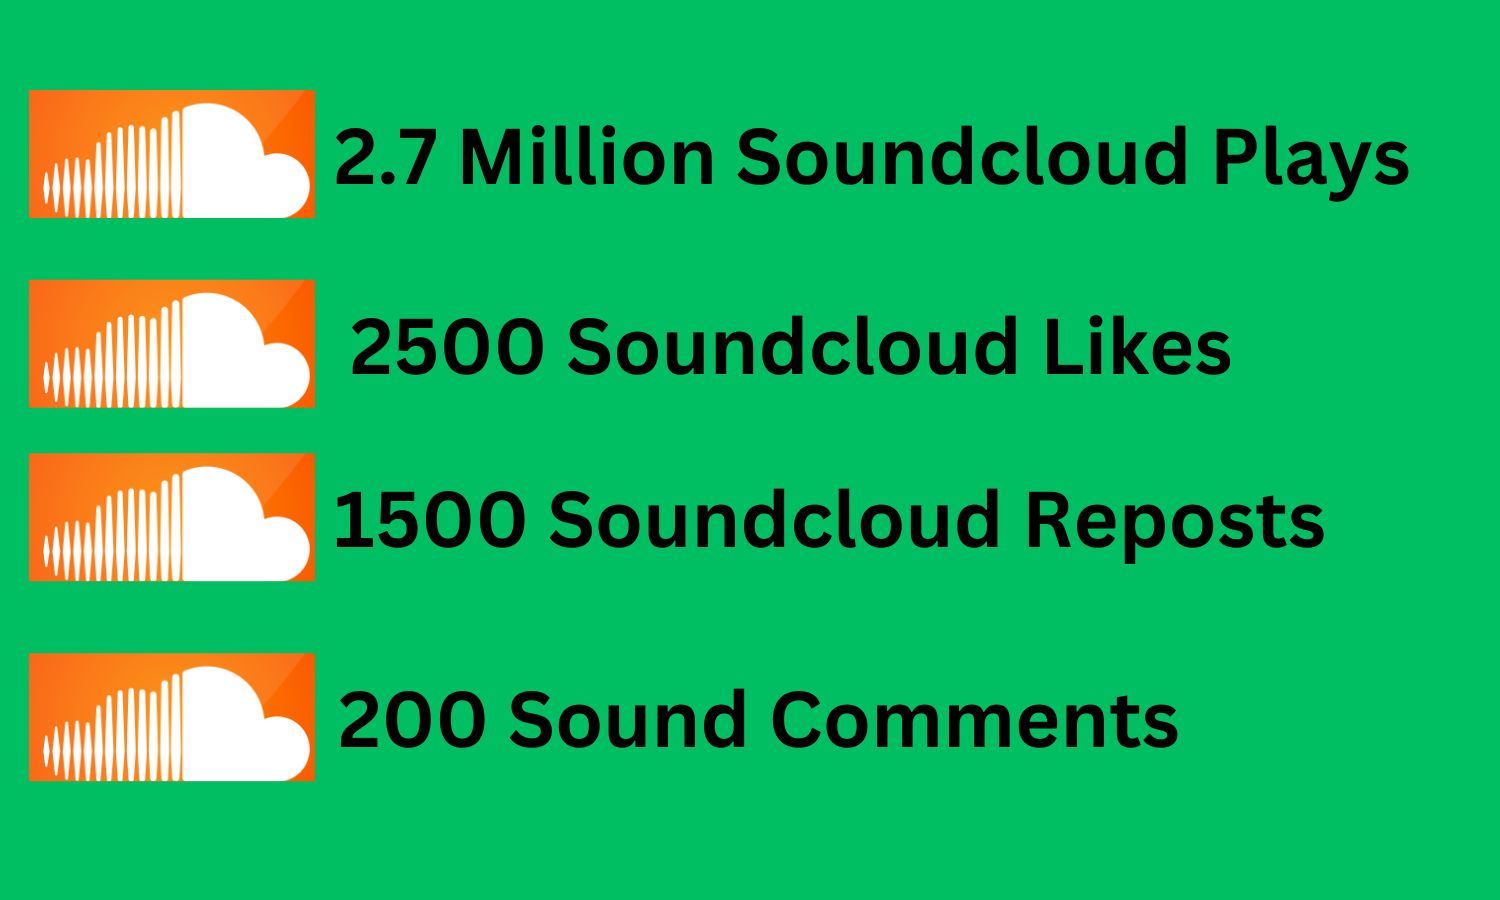 Soundcloud Safe Plays with 2.7 Million Soundcloud plays, 2500 Likes, 1500 Reposts and 200 Comments